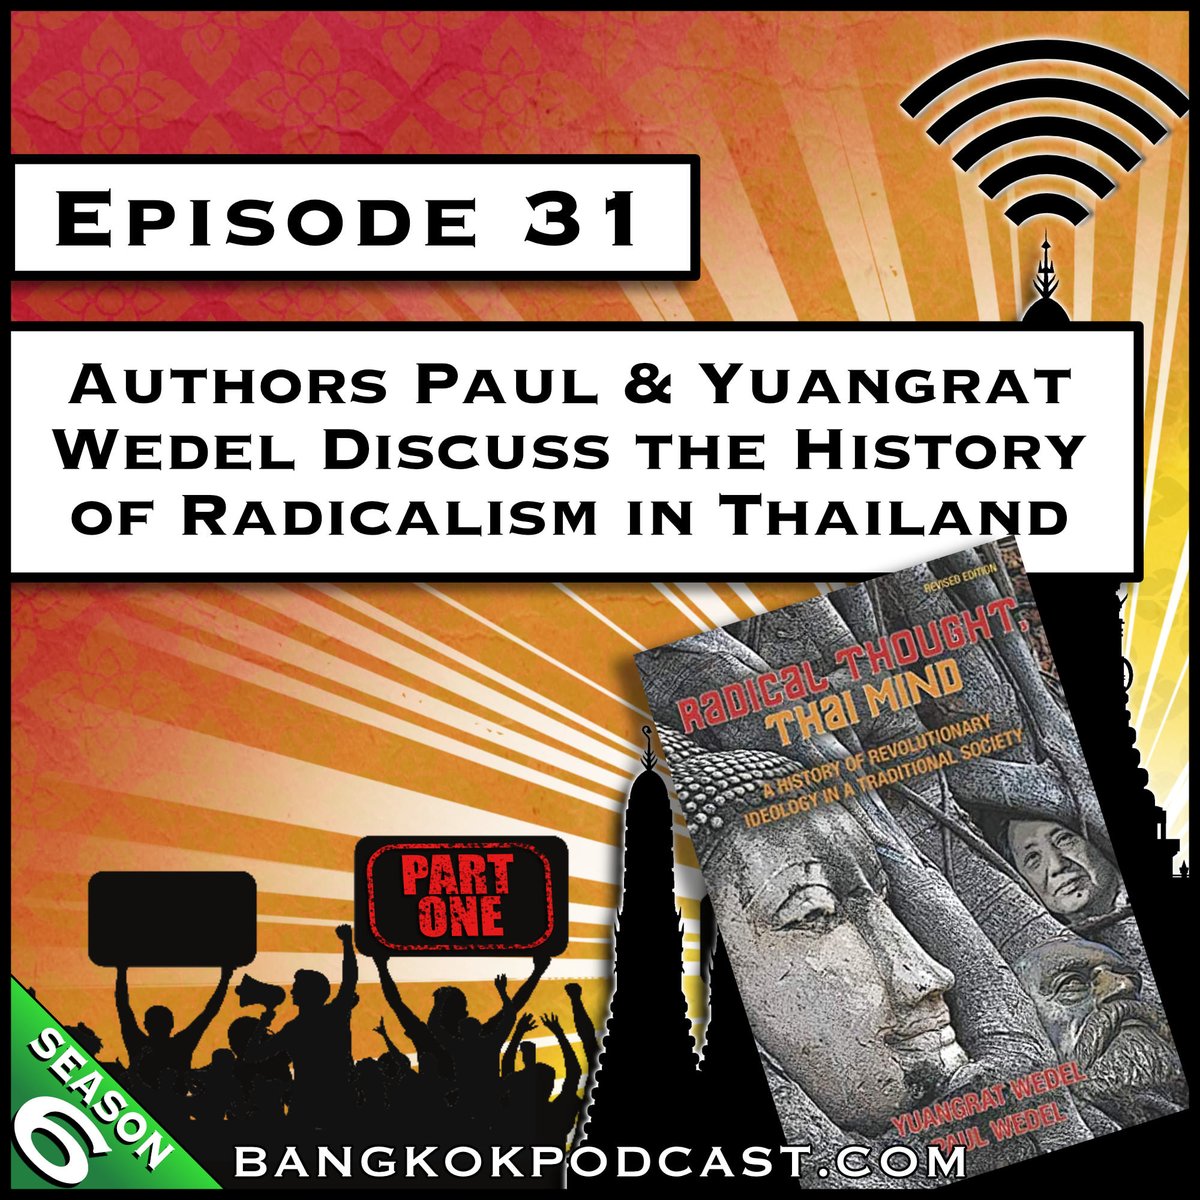 We sit down with authors Paul & Yuangrat Wedel to discuss their life in Thailand as well as their book “Radical Thought, Thai Mind” to learn about the complex history of standing up to The Man in Thailand. thaifaq.libsyn.com/authors-paul-y…